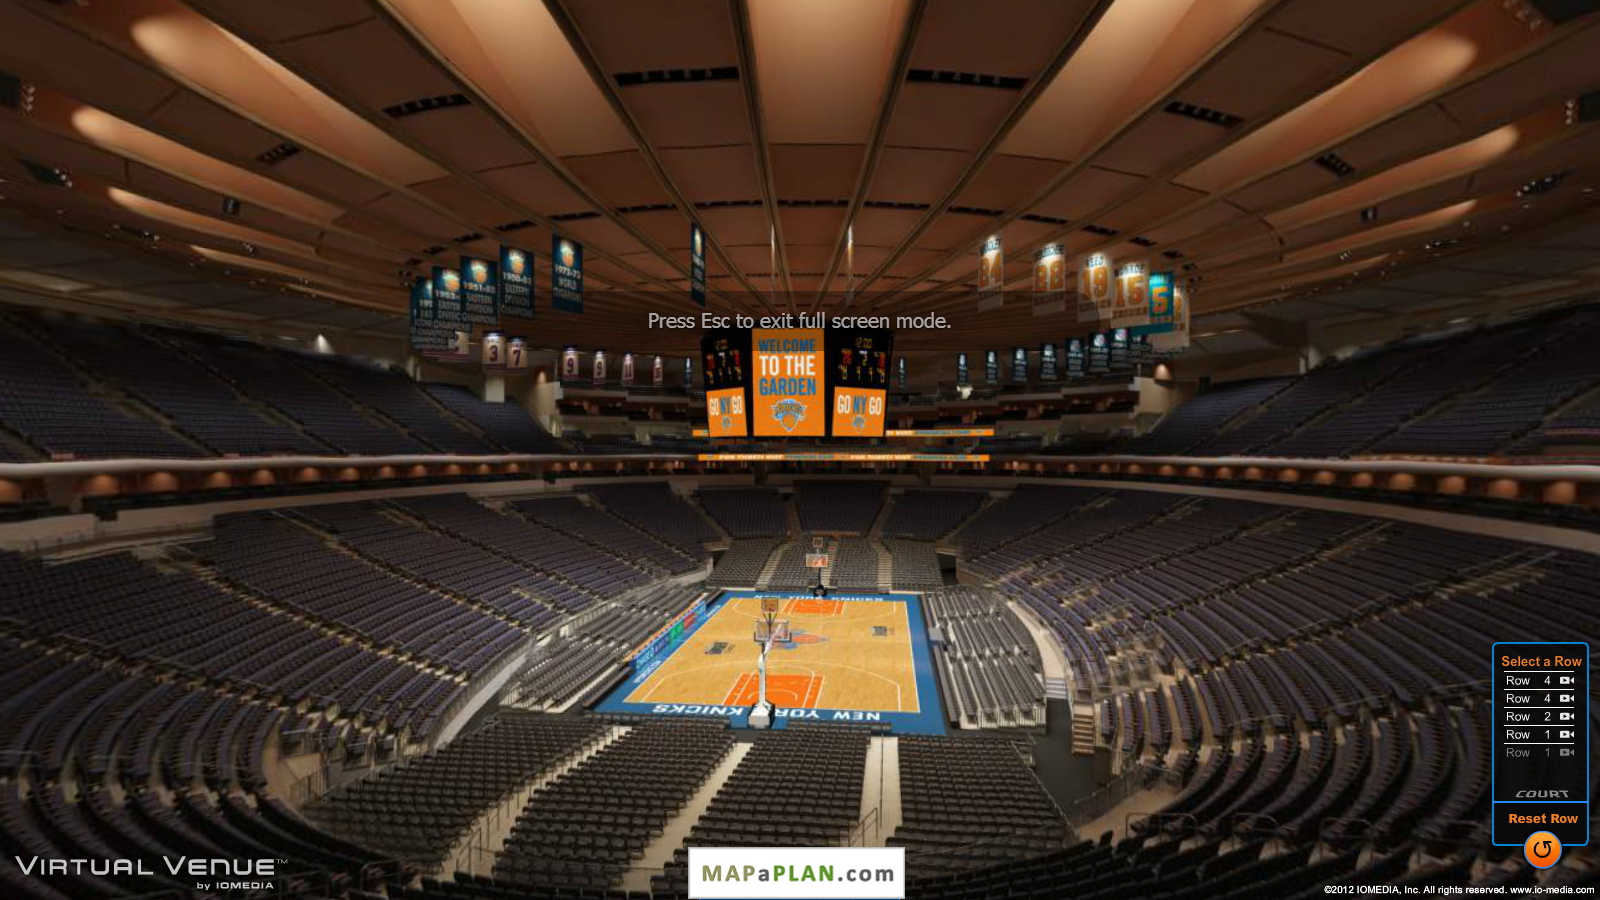 Madison Square Garden seating chart View from section 218